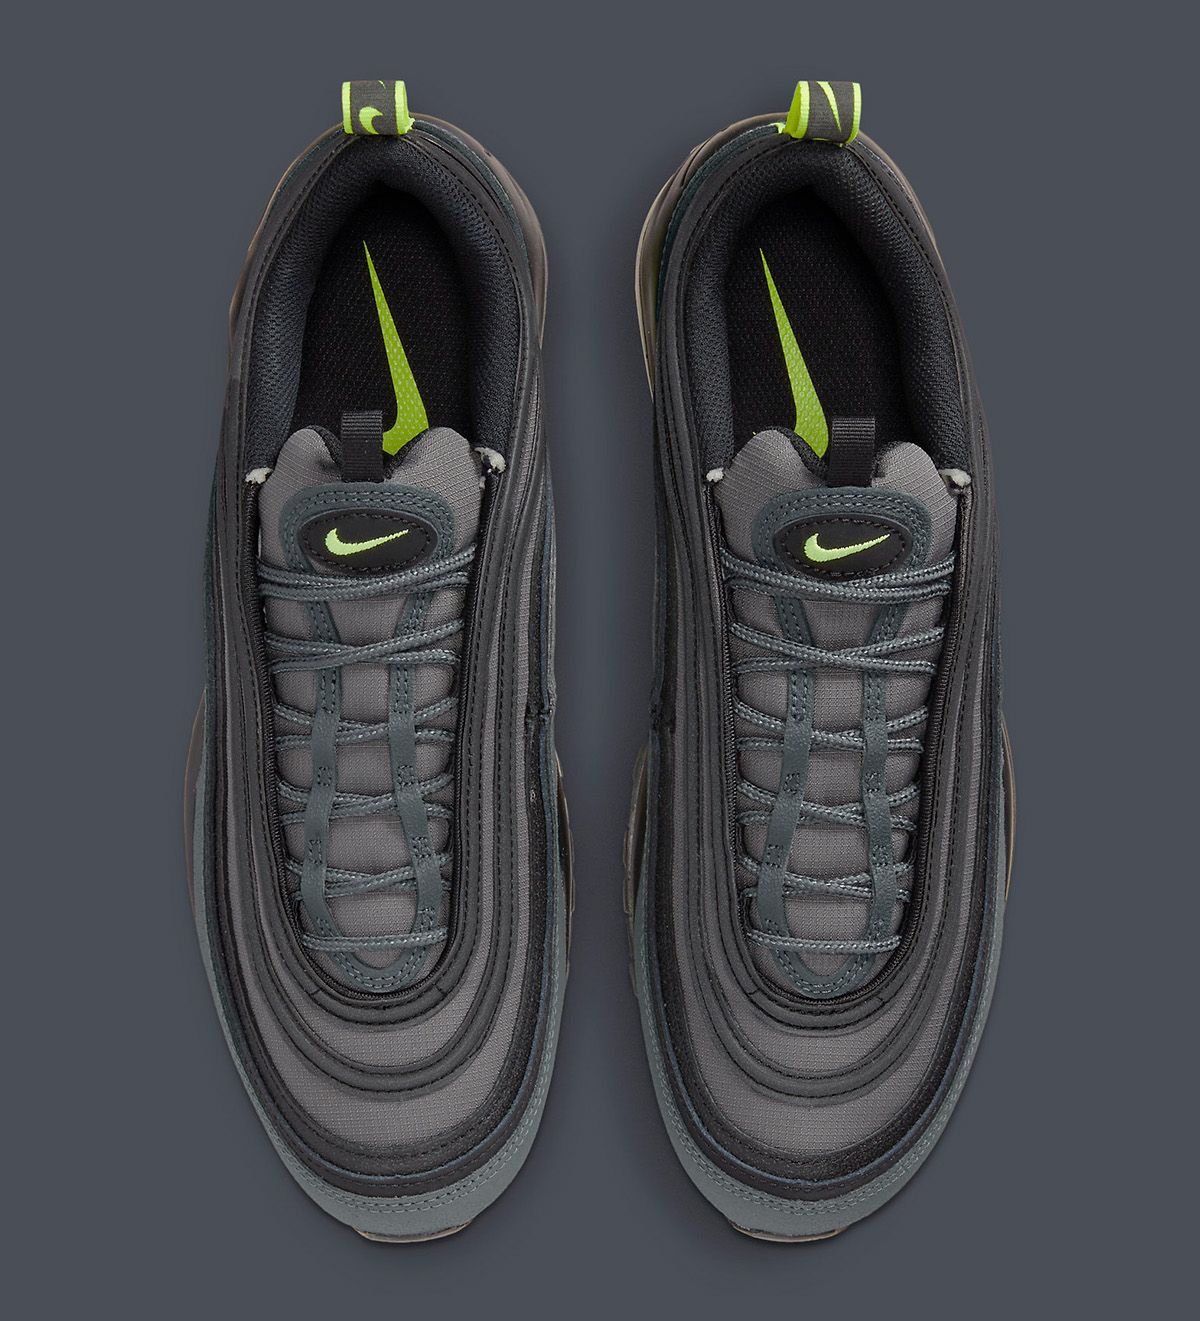 First Looks // Nike Air Max 97 “Black Neon” | House of Heat°